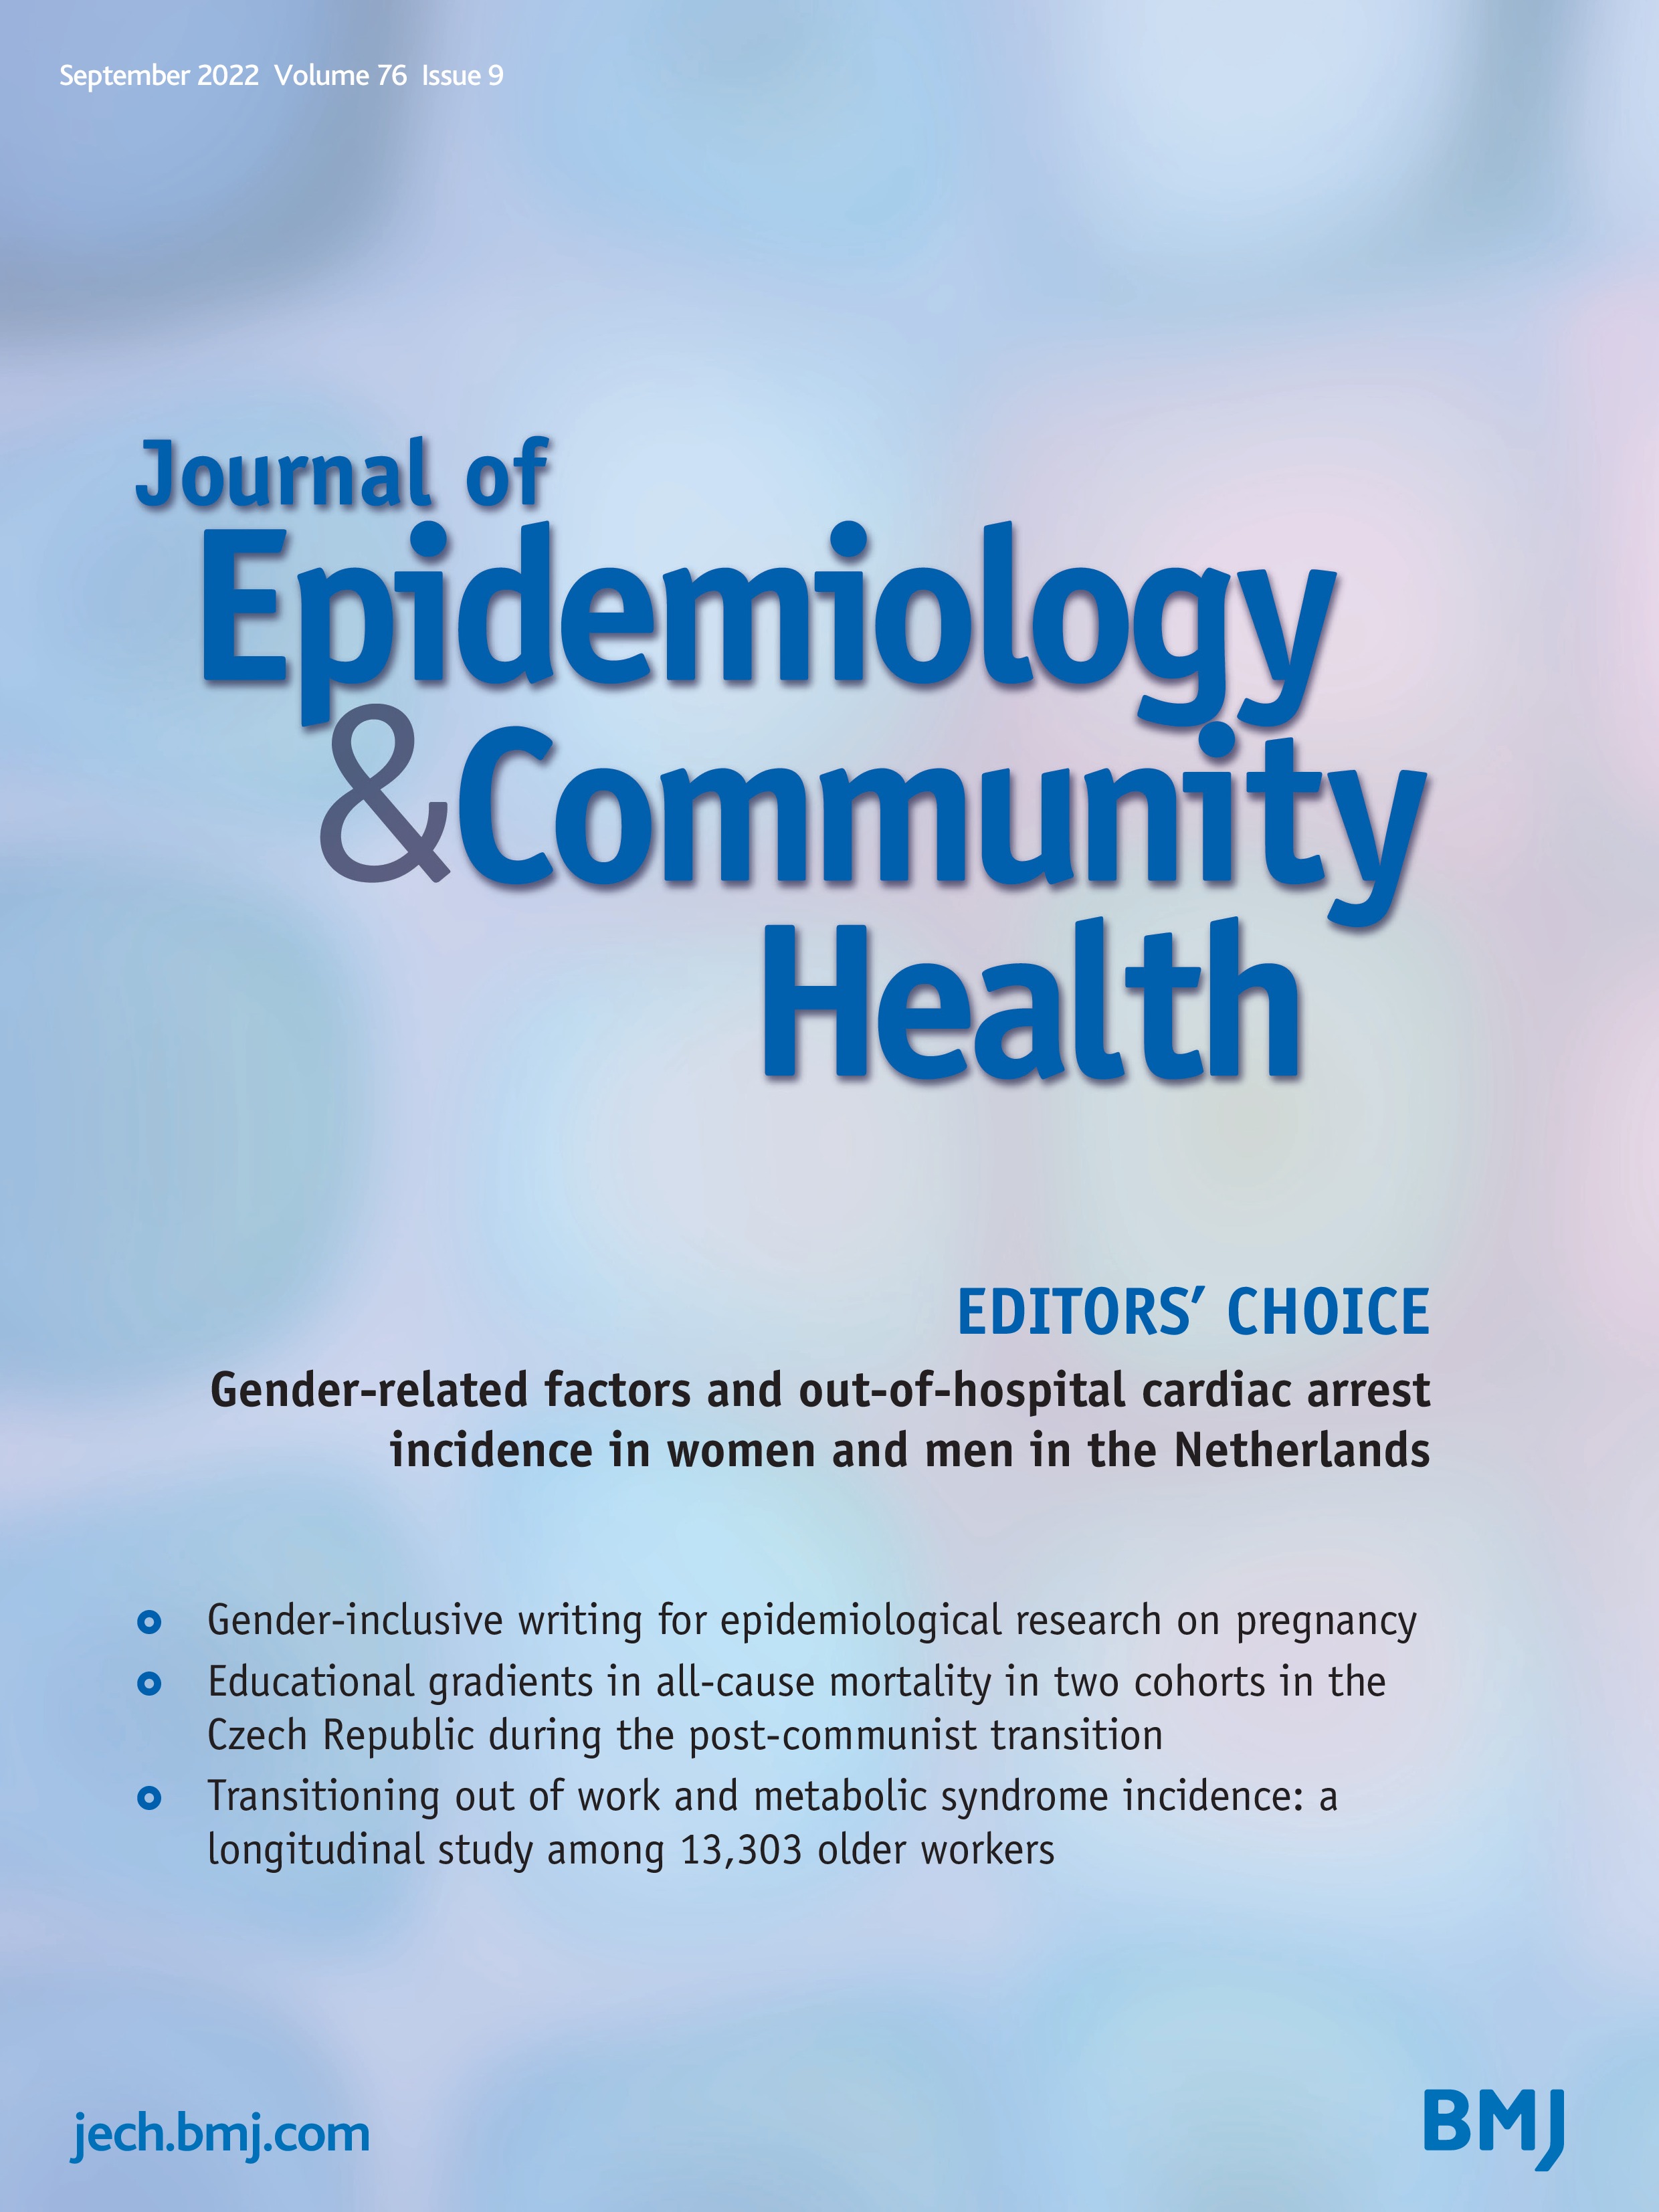 Gender-related factors and out-of-hospital cardiac arrest incidence in women and men: analysis of a population-based cohort study in the Netherlands